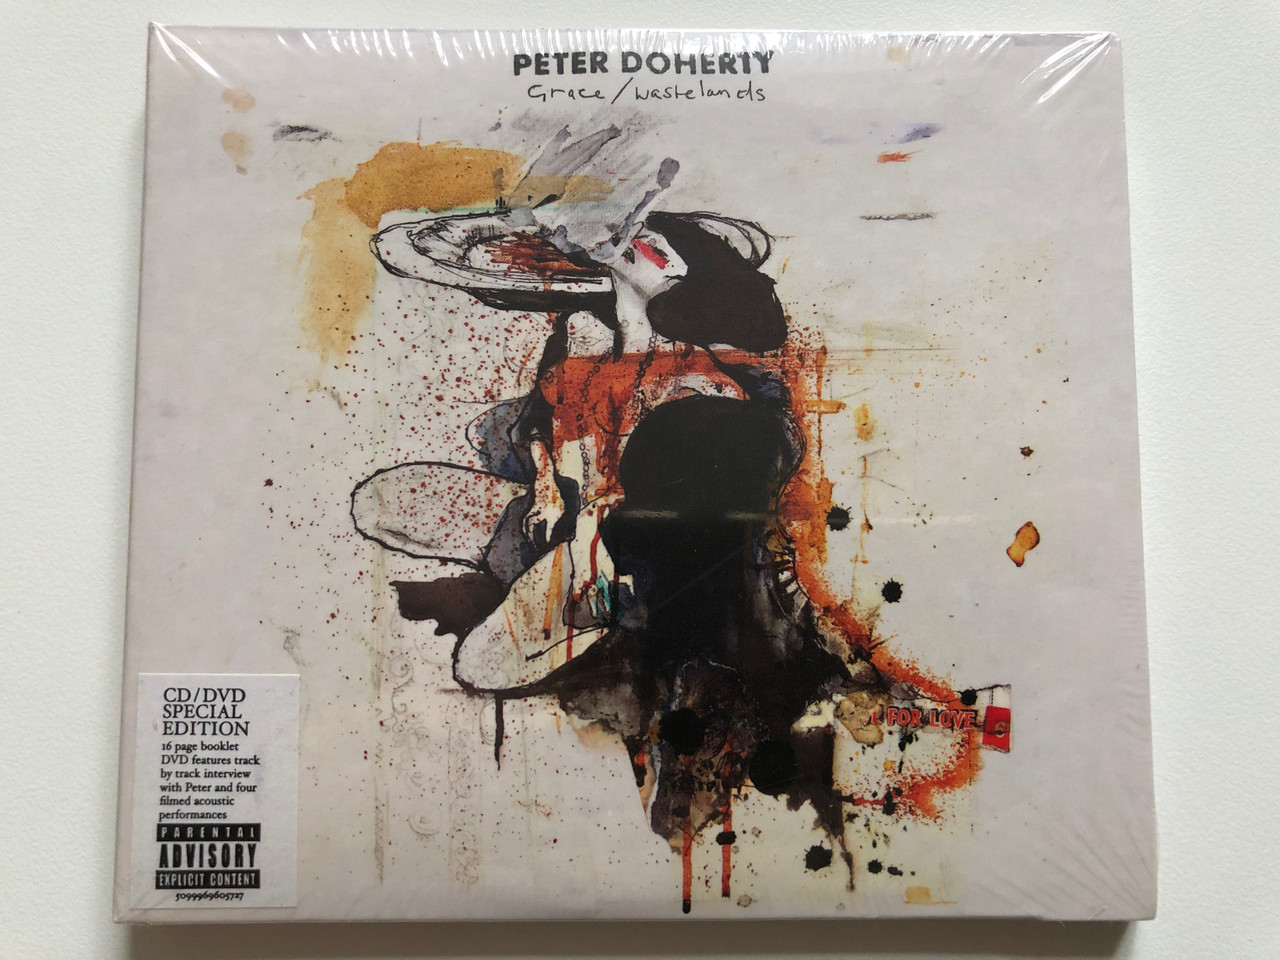 https://cdn10.bigcommerce.com/s-62bdpkt7pb/products/0/images/221279/Peter_Doherty_GraceWastelands_CDDVD_Special_Edition_-_16_page_booklet_DVD_features_track_by_track_interview_with_Peter_and_four_filmed_acoustic_performances_Parlophone_CD_DVD_Video_2009_1__15635.1649658614.1280.1280.JPG?c=2&_gl=1*2j6rpj*_ga*MjA2NTIxMjE2MC4xNTkwNTEyNTMy*_ga_WS2VZYPC6G*MTY0OTY1NzEzNy4zNTMuMS4xNjQ5NjU4MTExLjQ0